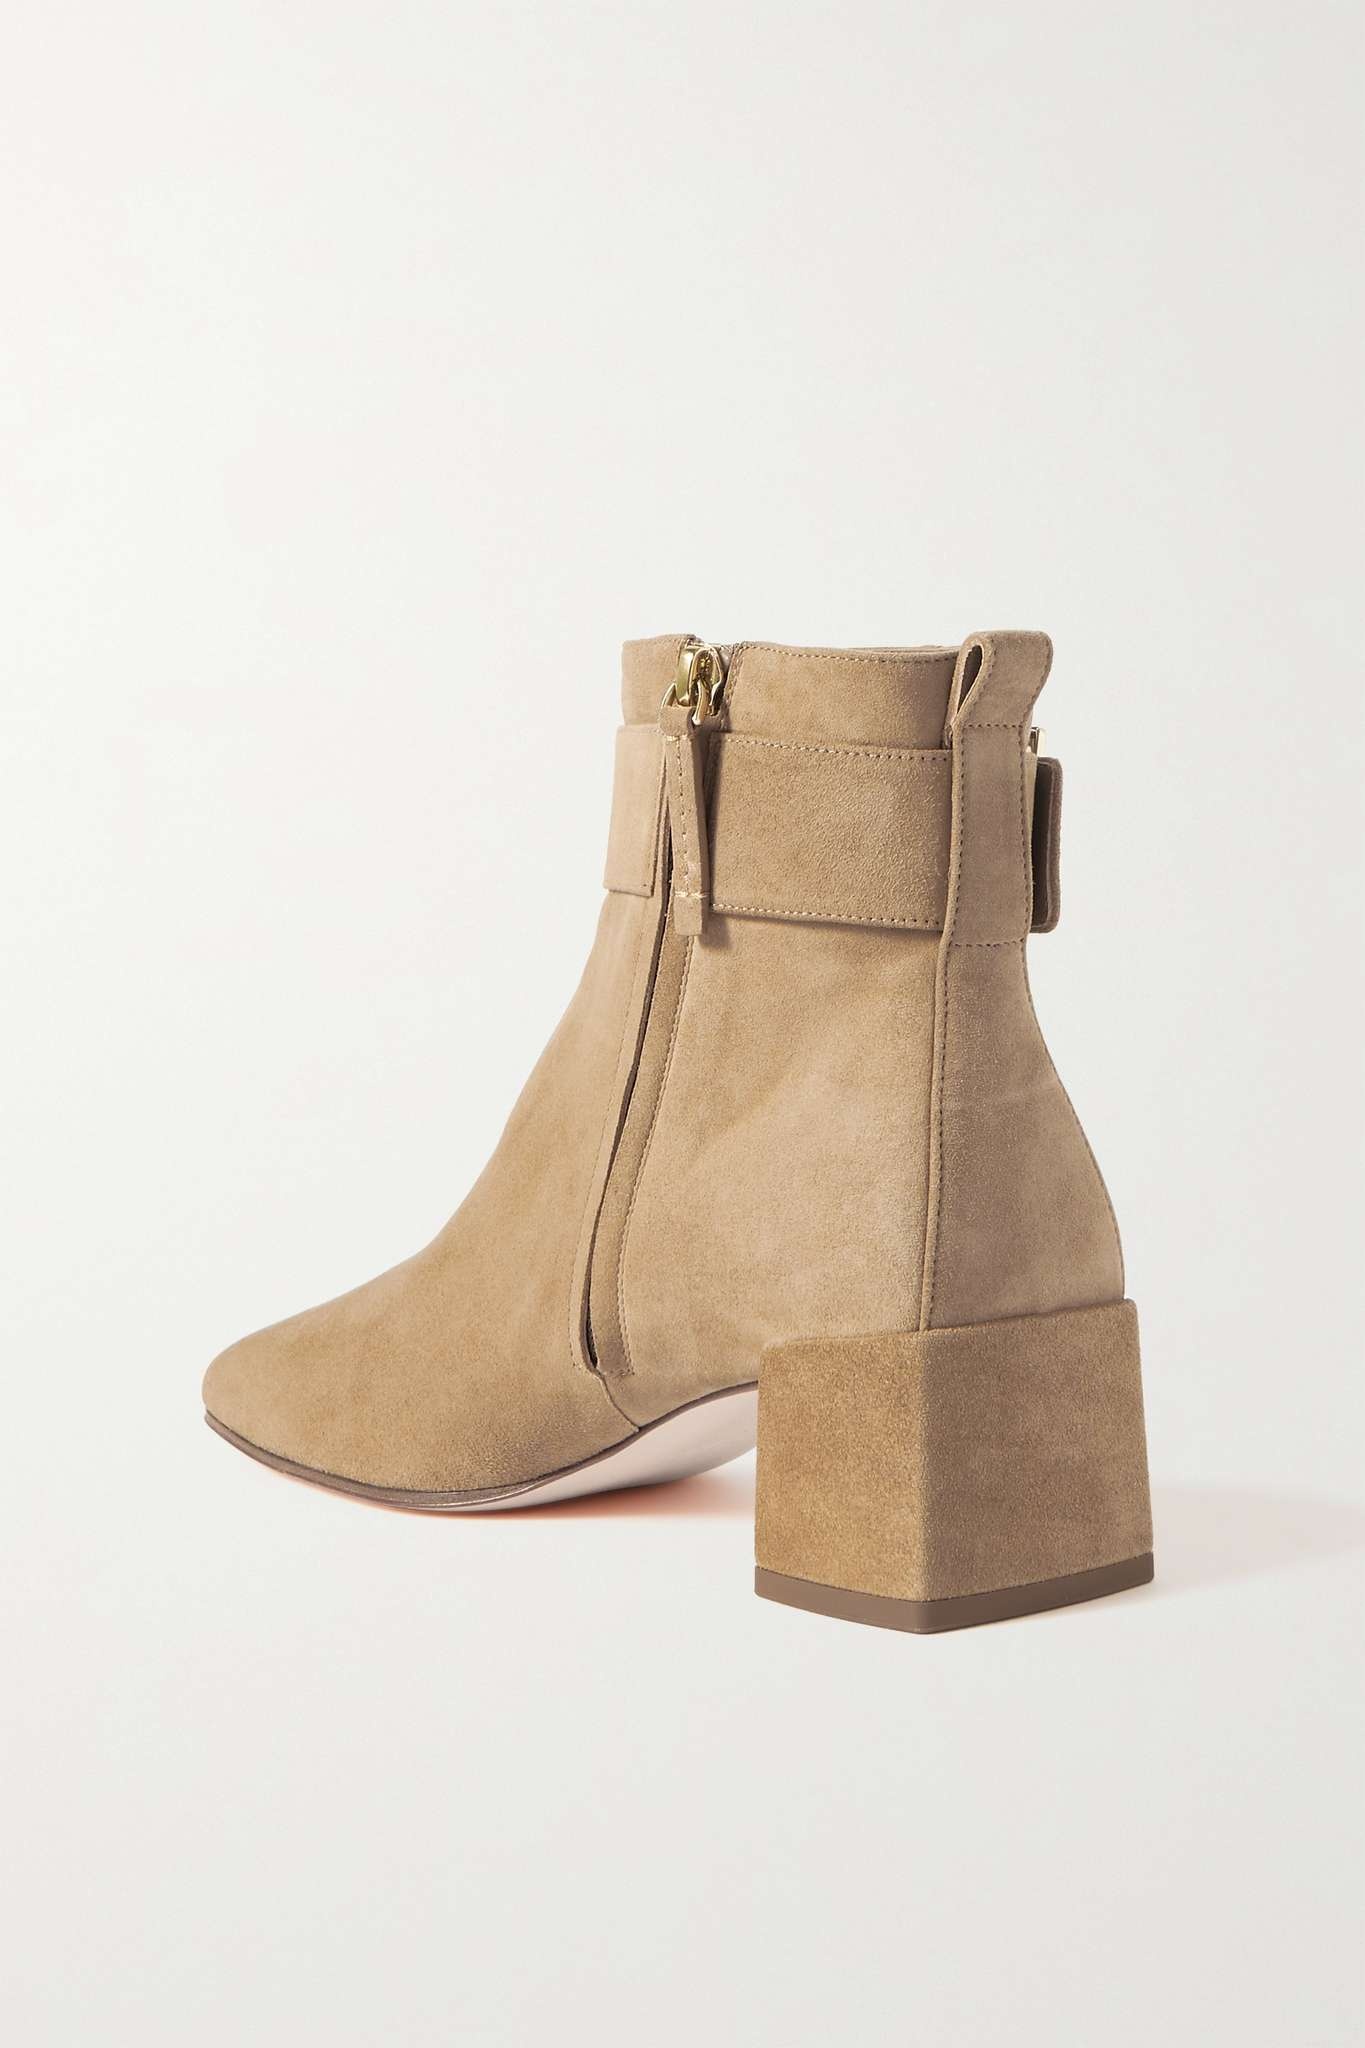 So Vivier buckled suede ankle boots - 3